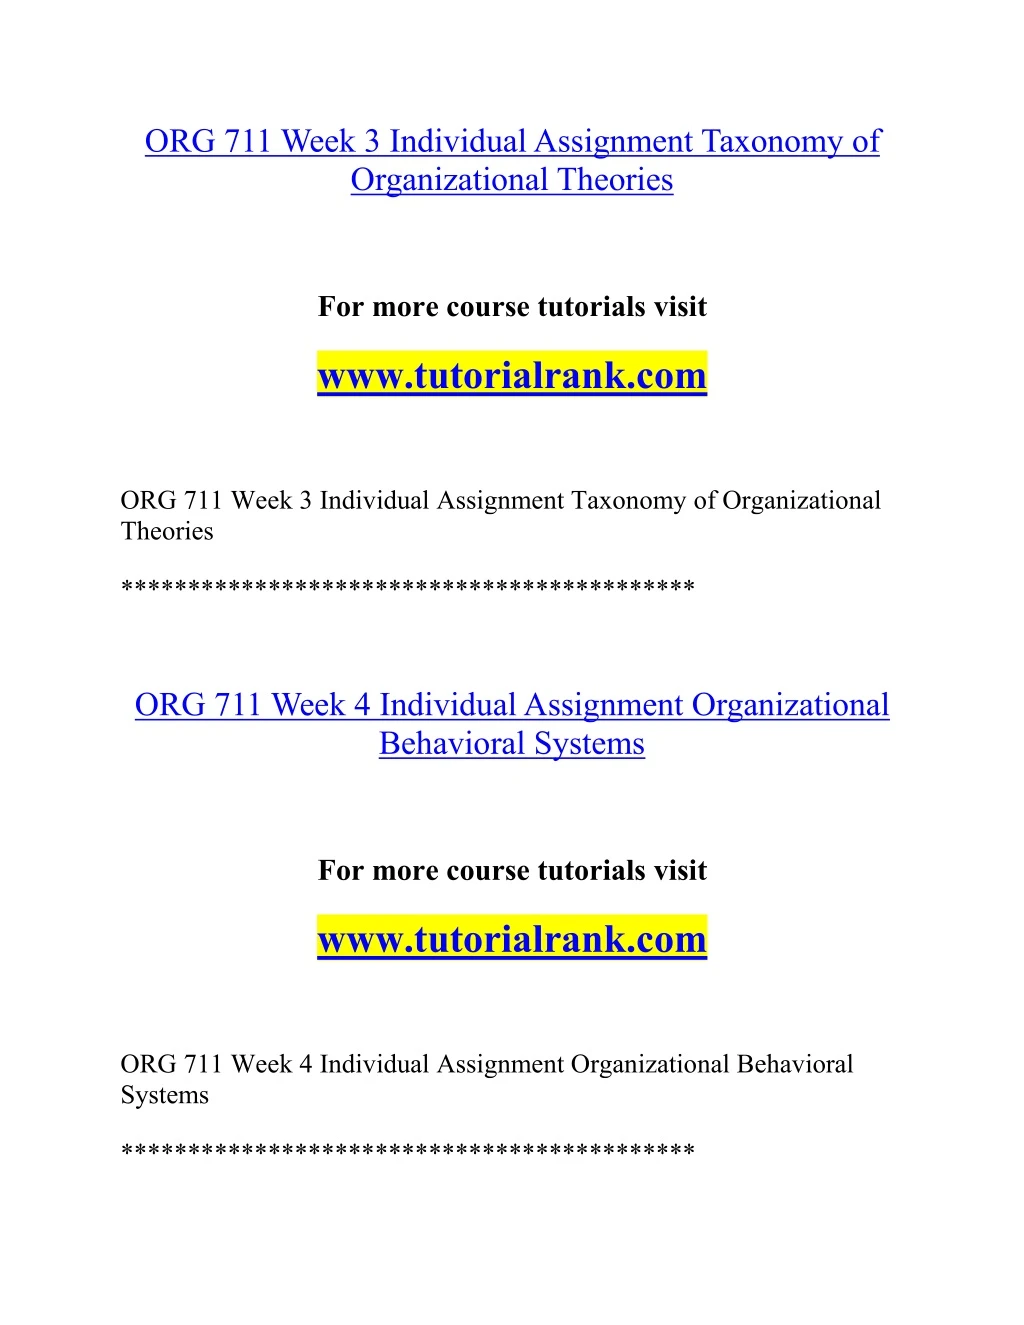 org 711 week 3 individualassignment taxonomy